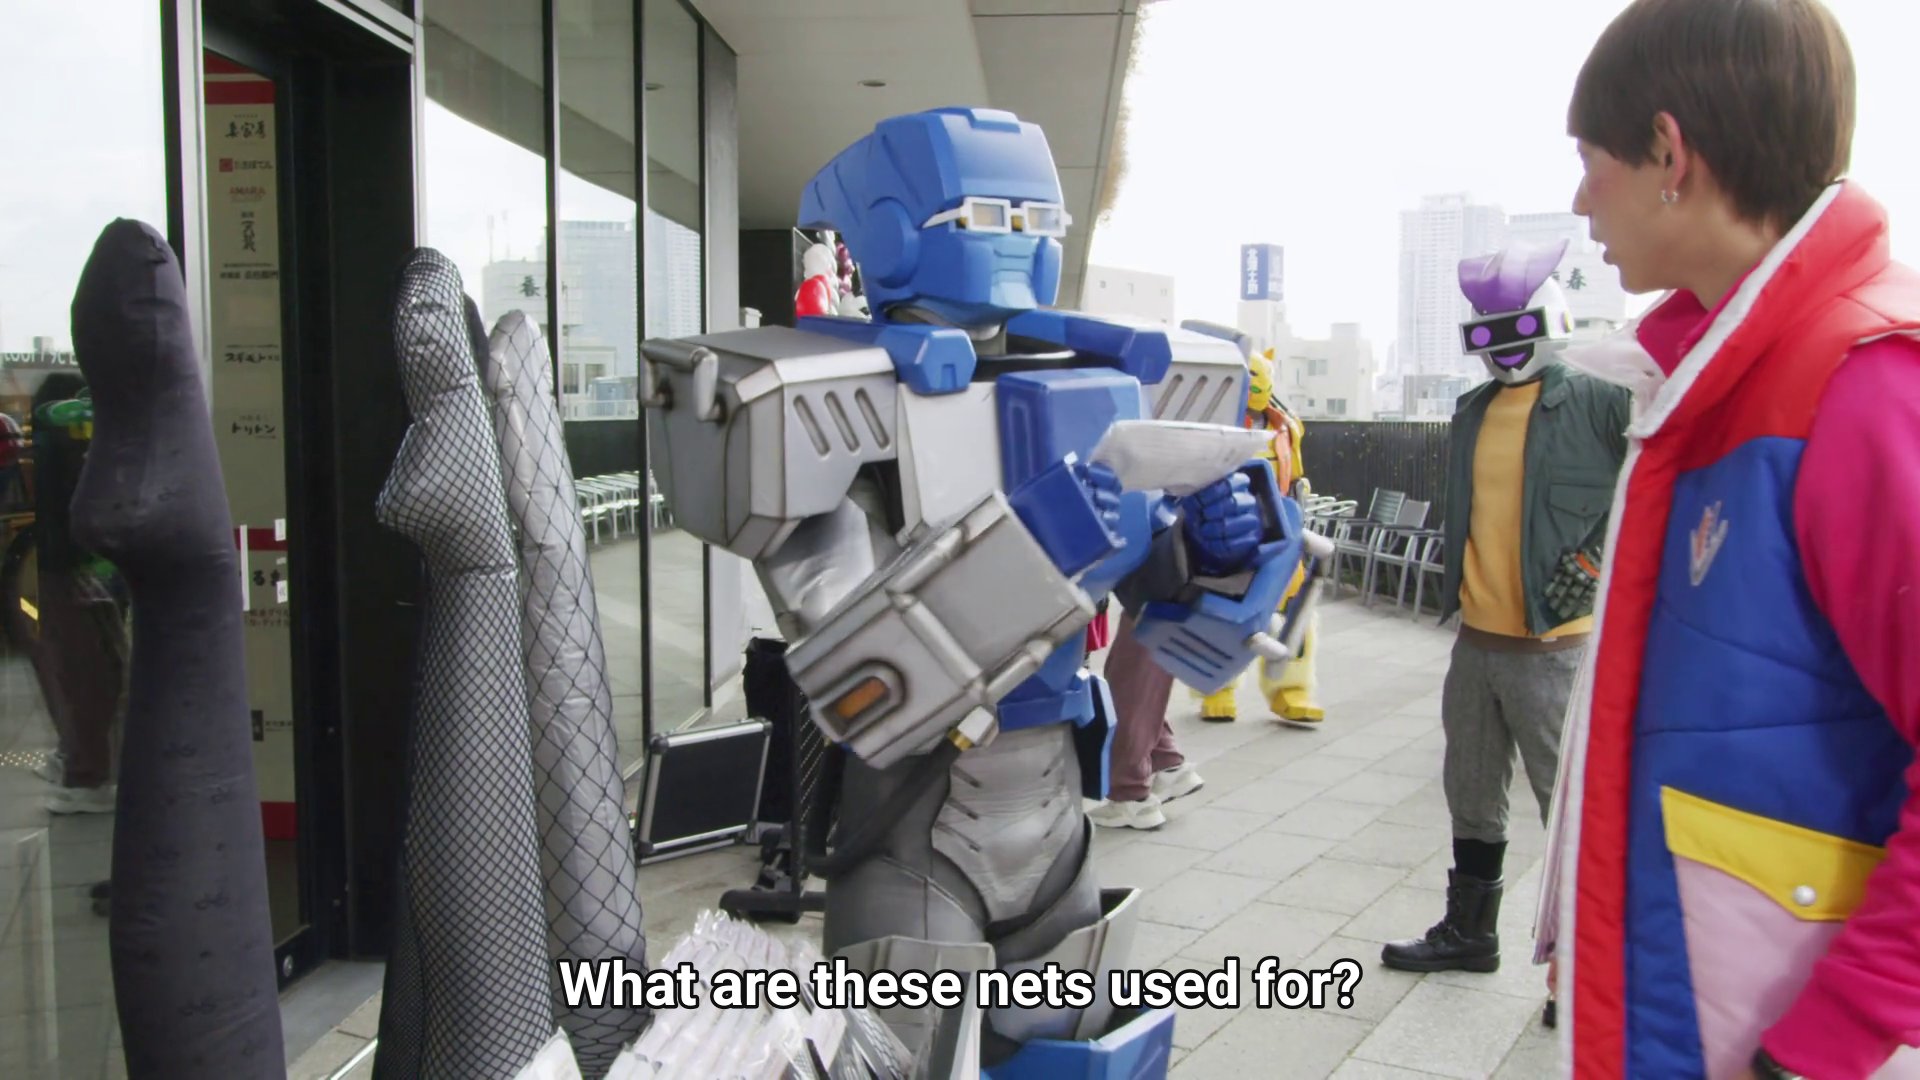 Broon, a blue and grey robot, very square and wearing glasses, beside a display of stockings and talking to Kaito: What are these nets used for?